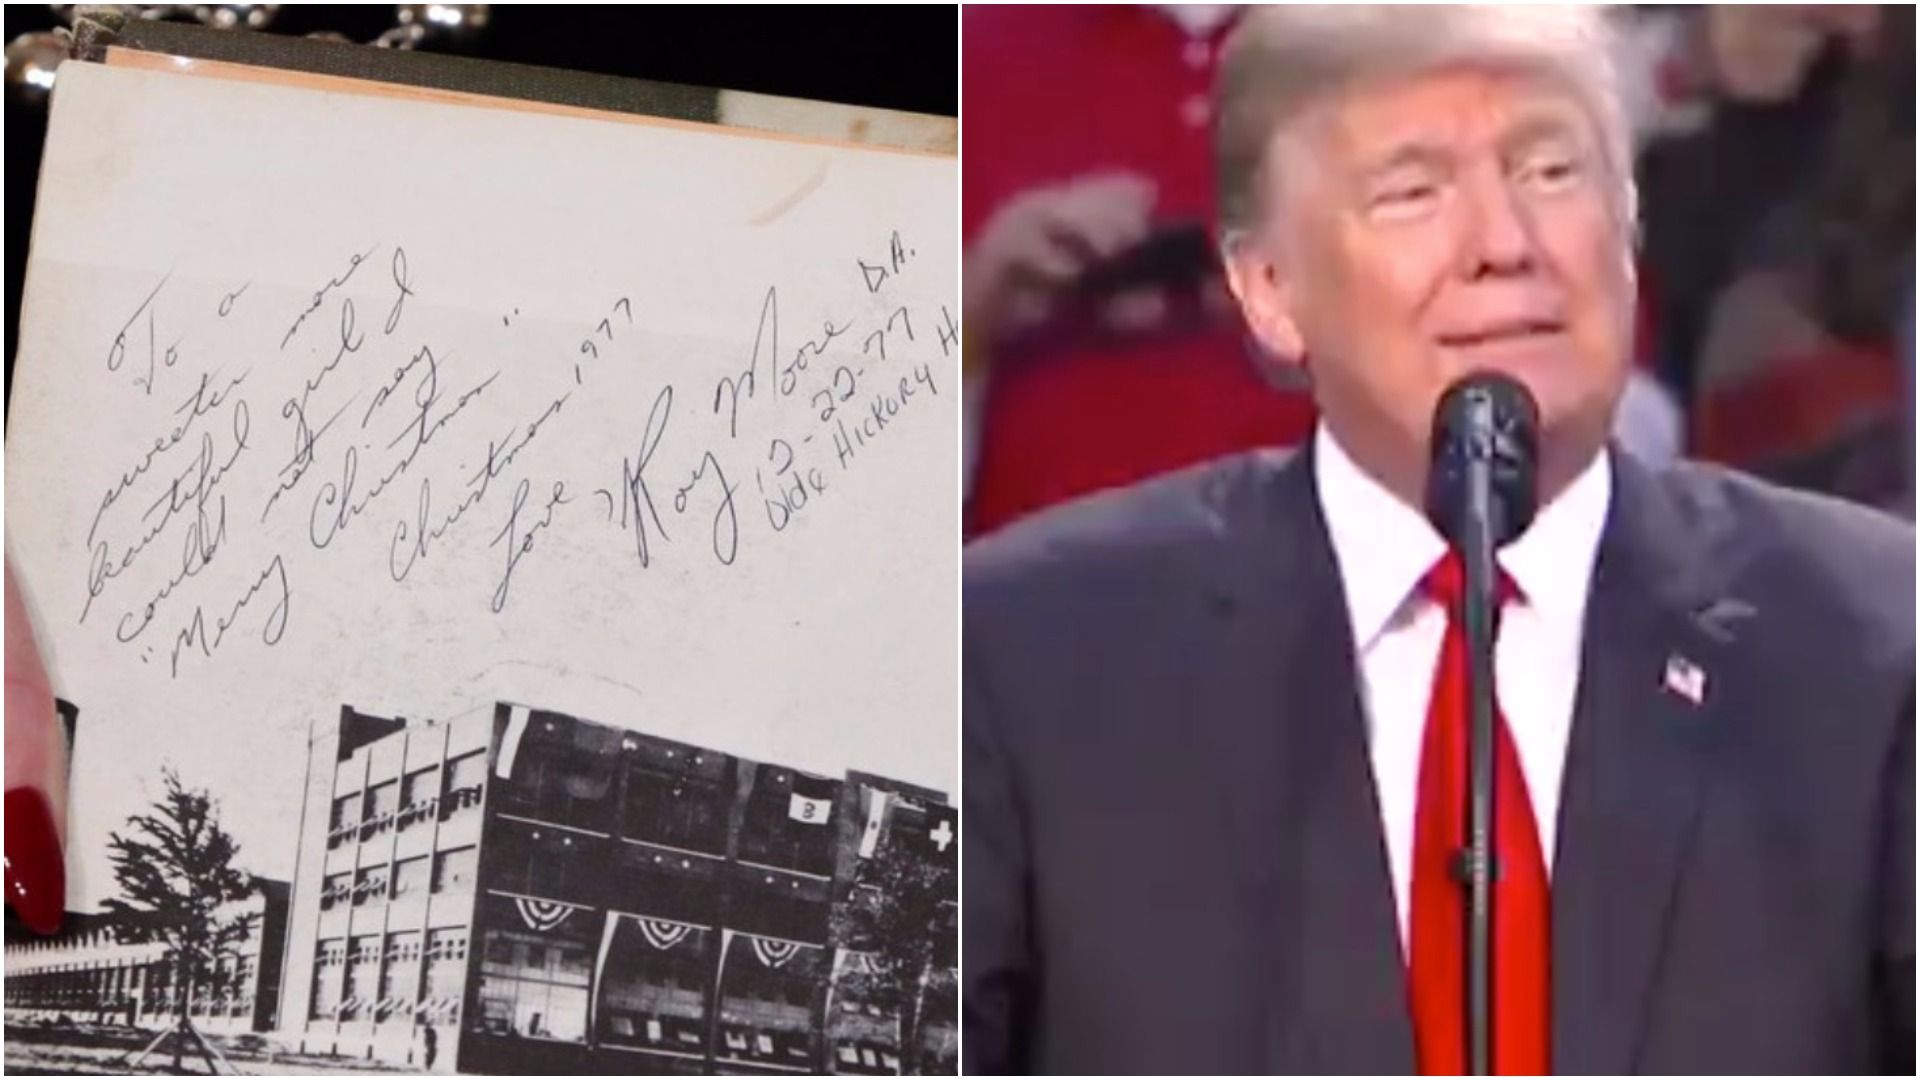 Trump and the yearbook